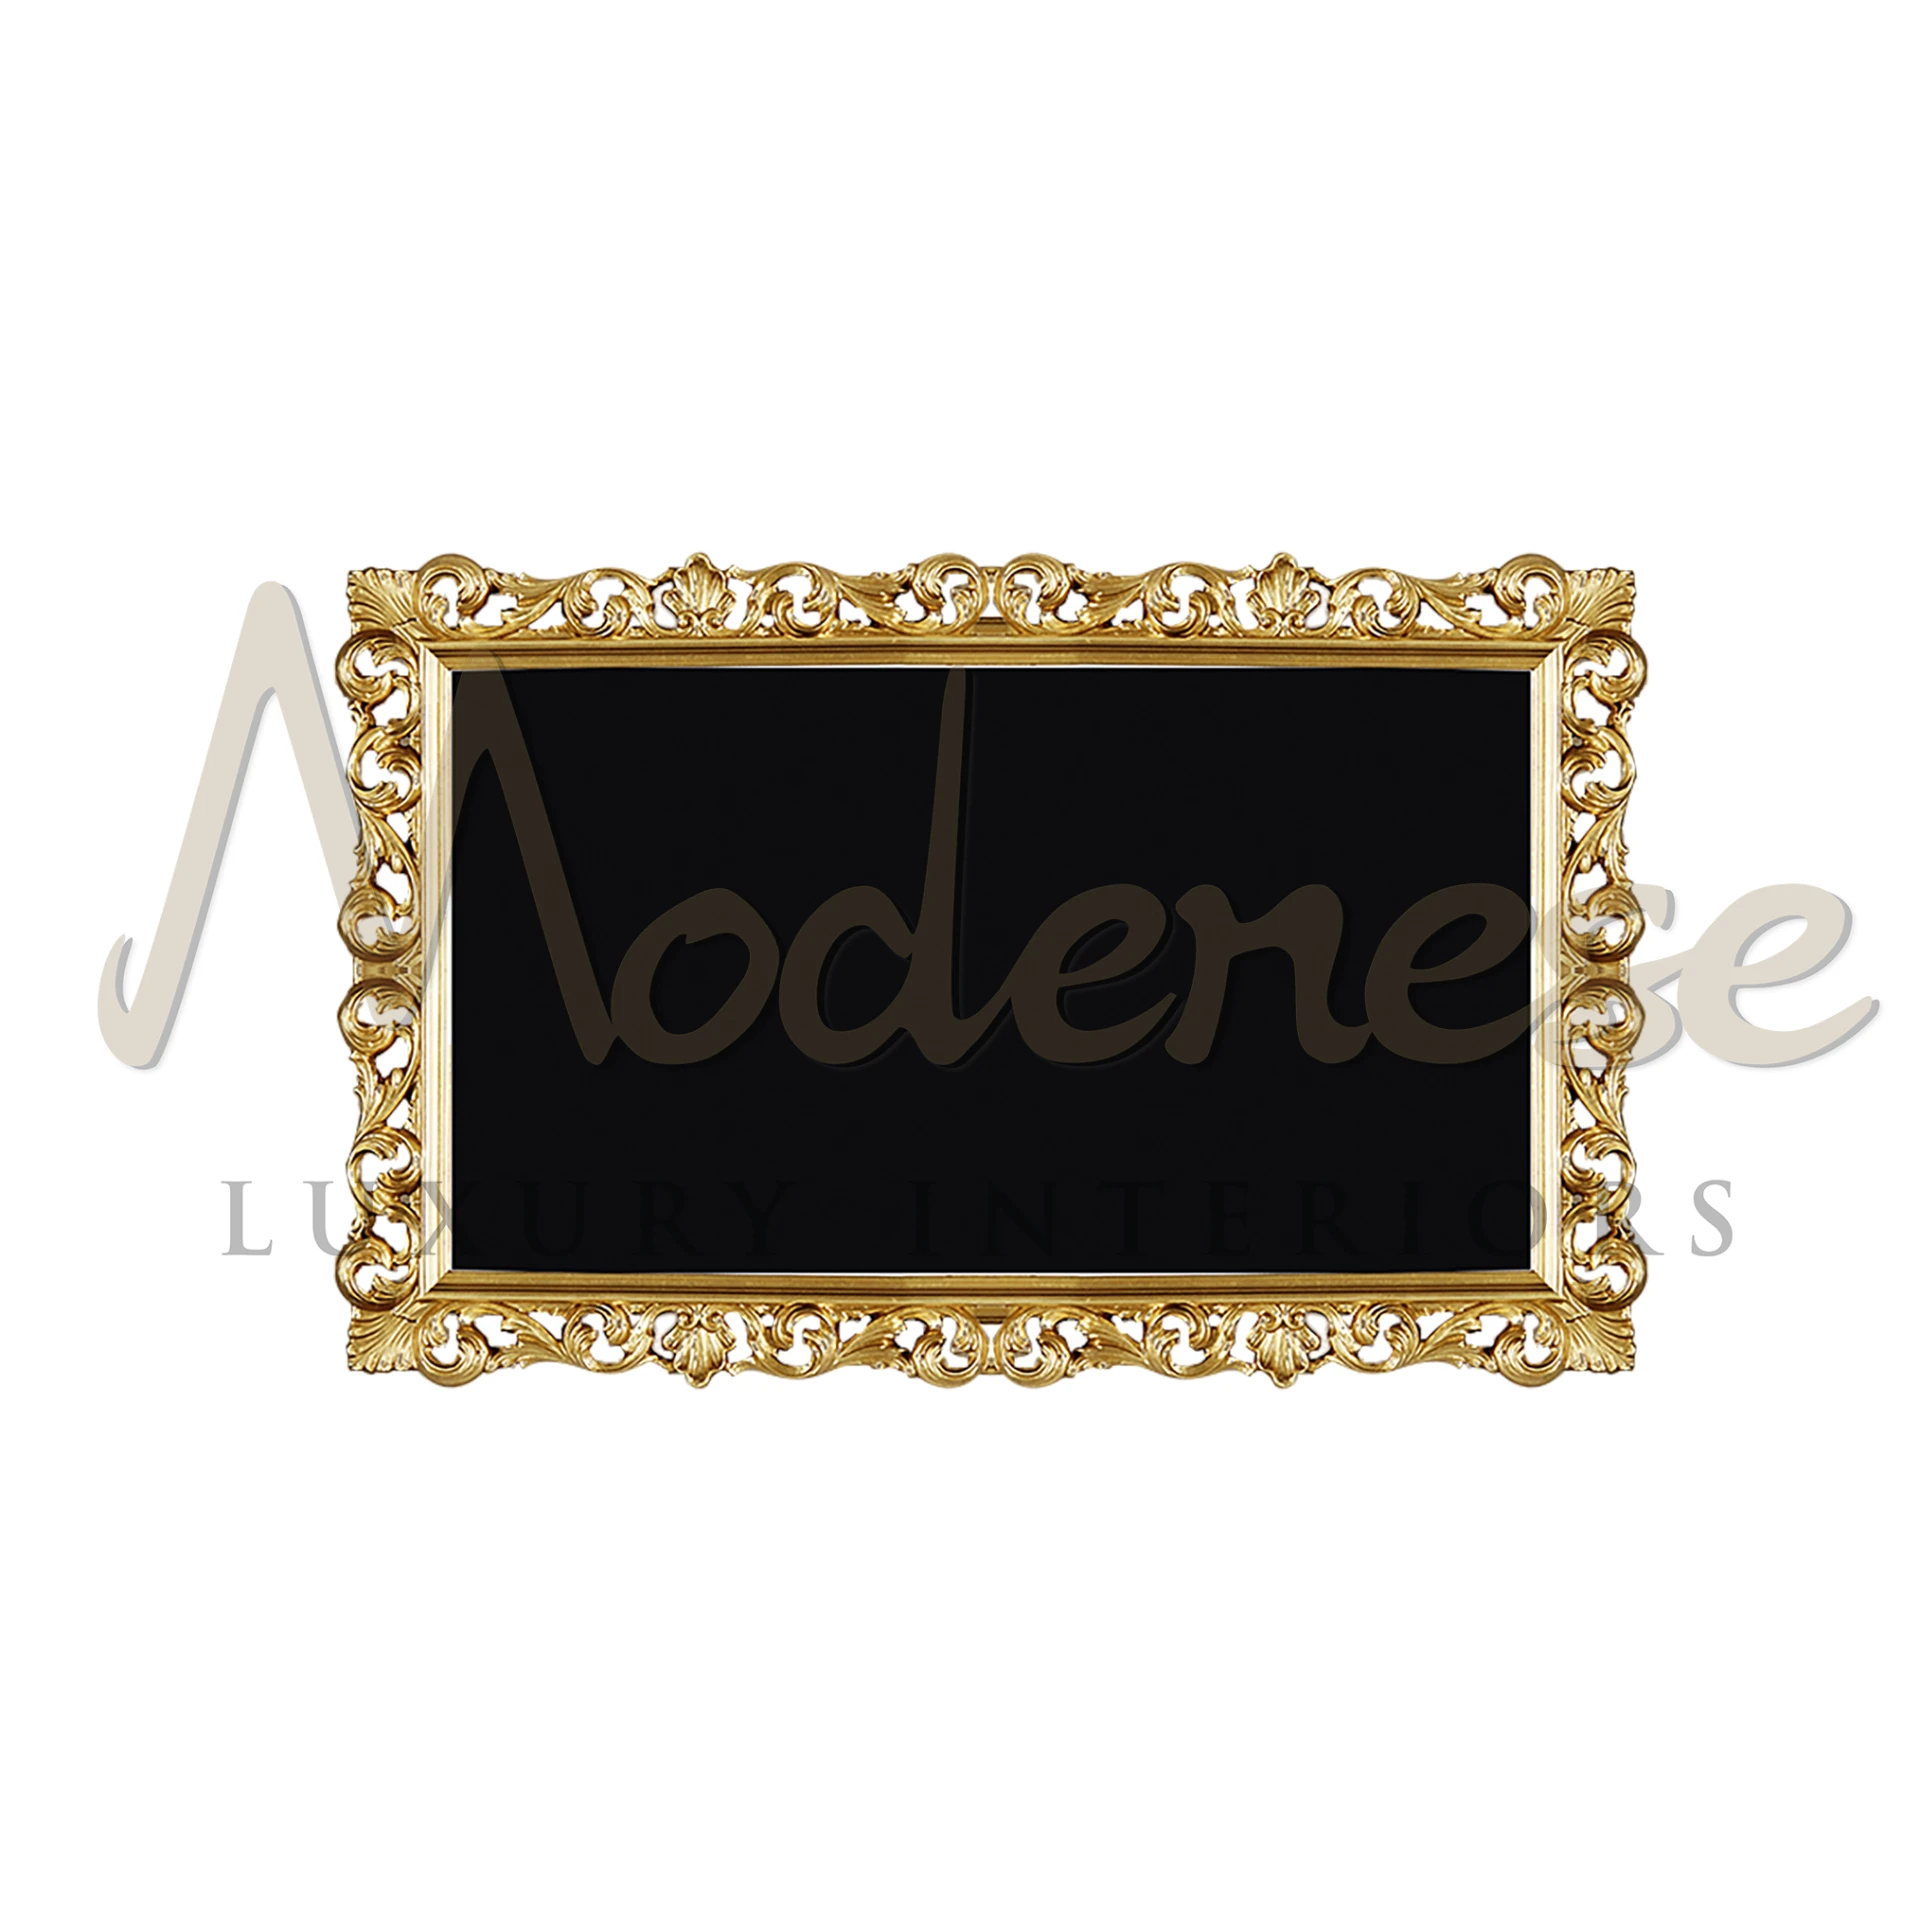 Elegant Traditional Gold Leaf TV Frame with intricate carvings, embodying classic luxury and timeless design for interiors.